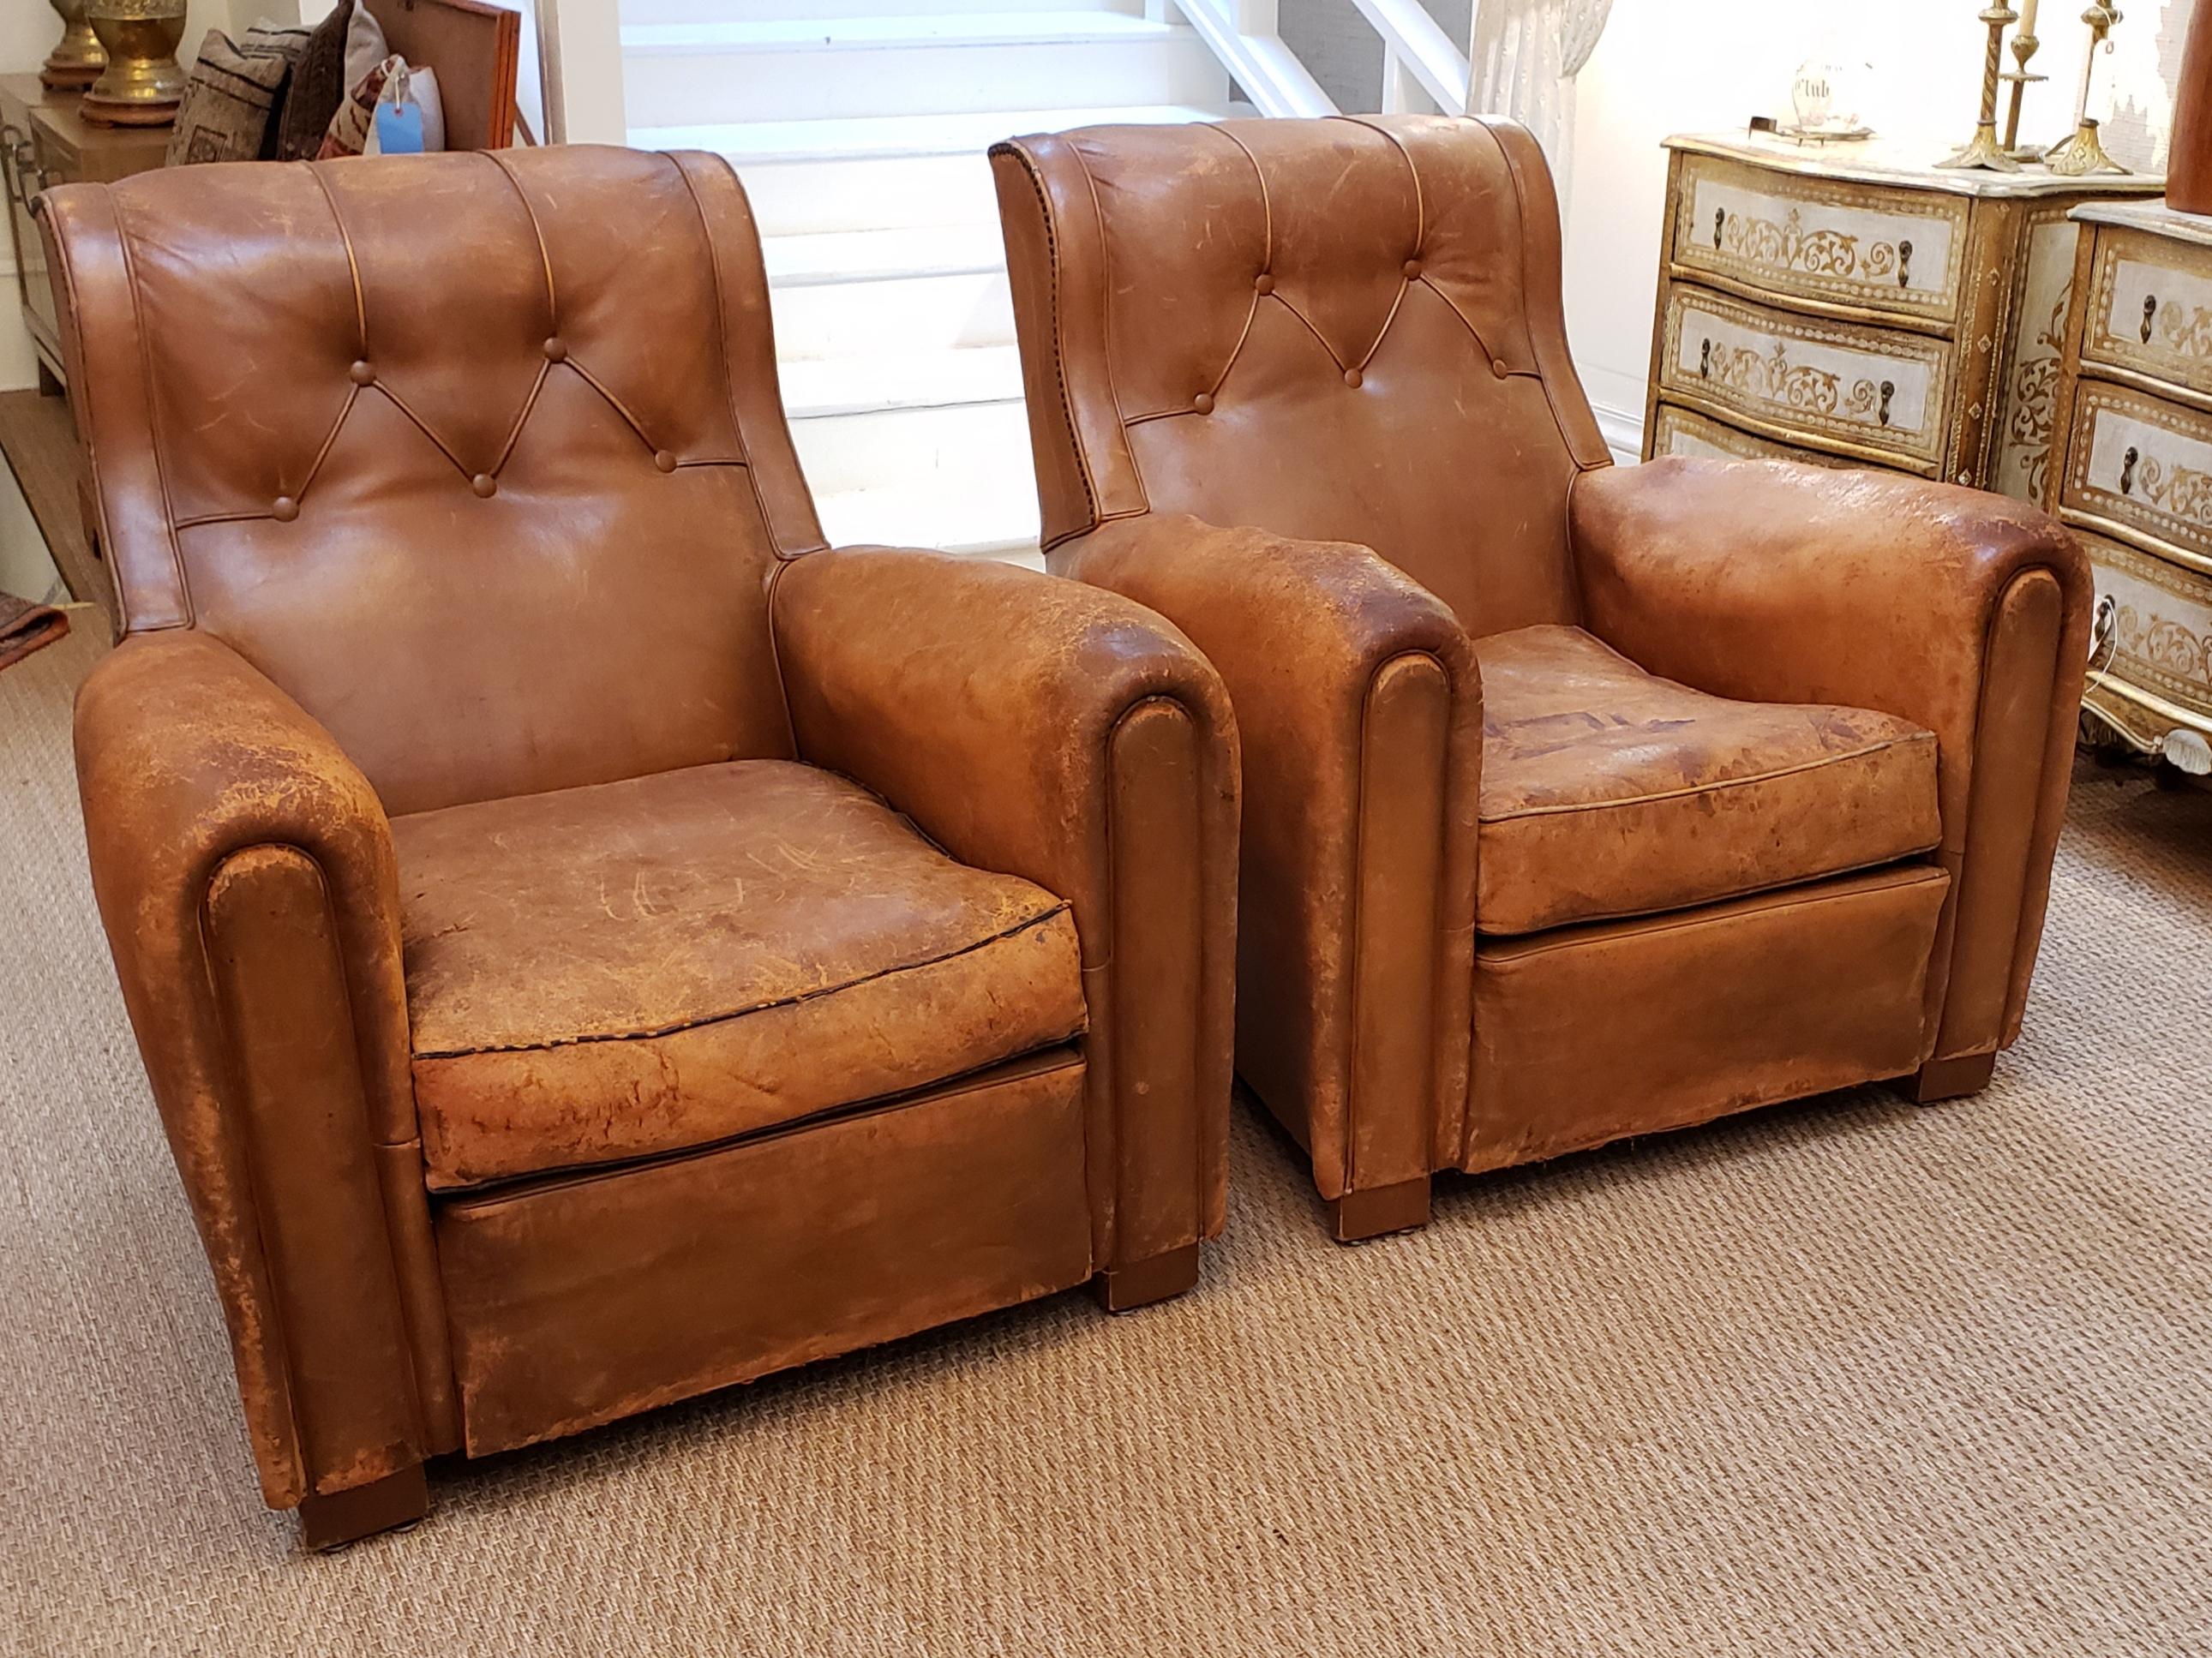 A fantastic pair of Art Deco leather club chairs. Having a beautiful warm patina these chairs are inviting to anybody who sees them. And their inclined backs make them a wonderful fireside accessory.
Being sold only as the pair.